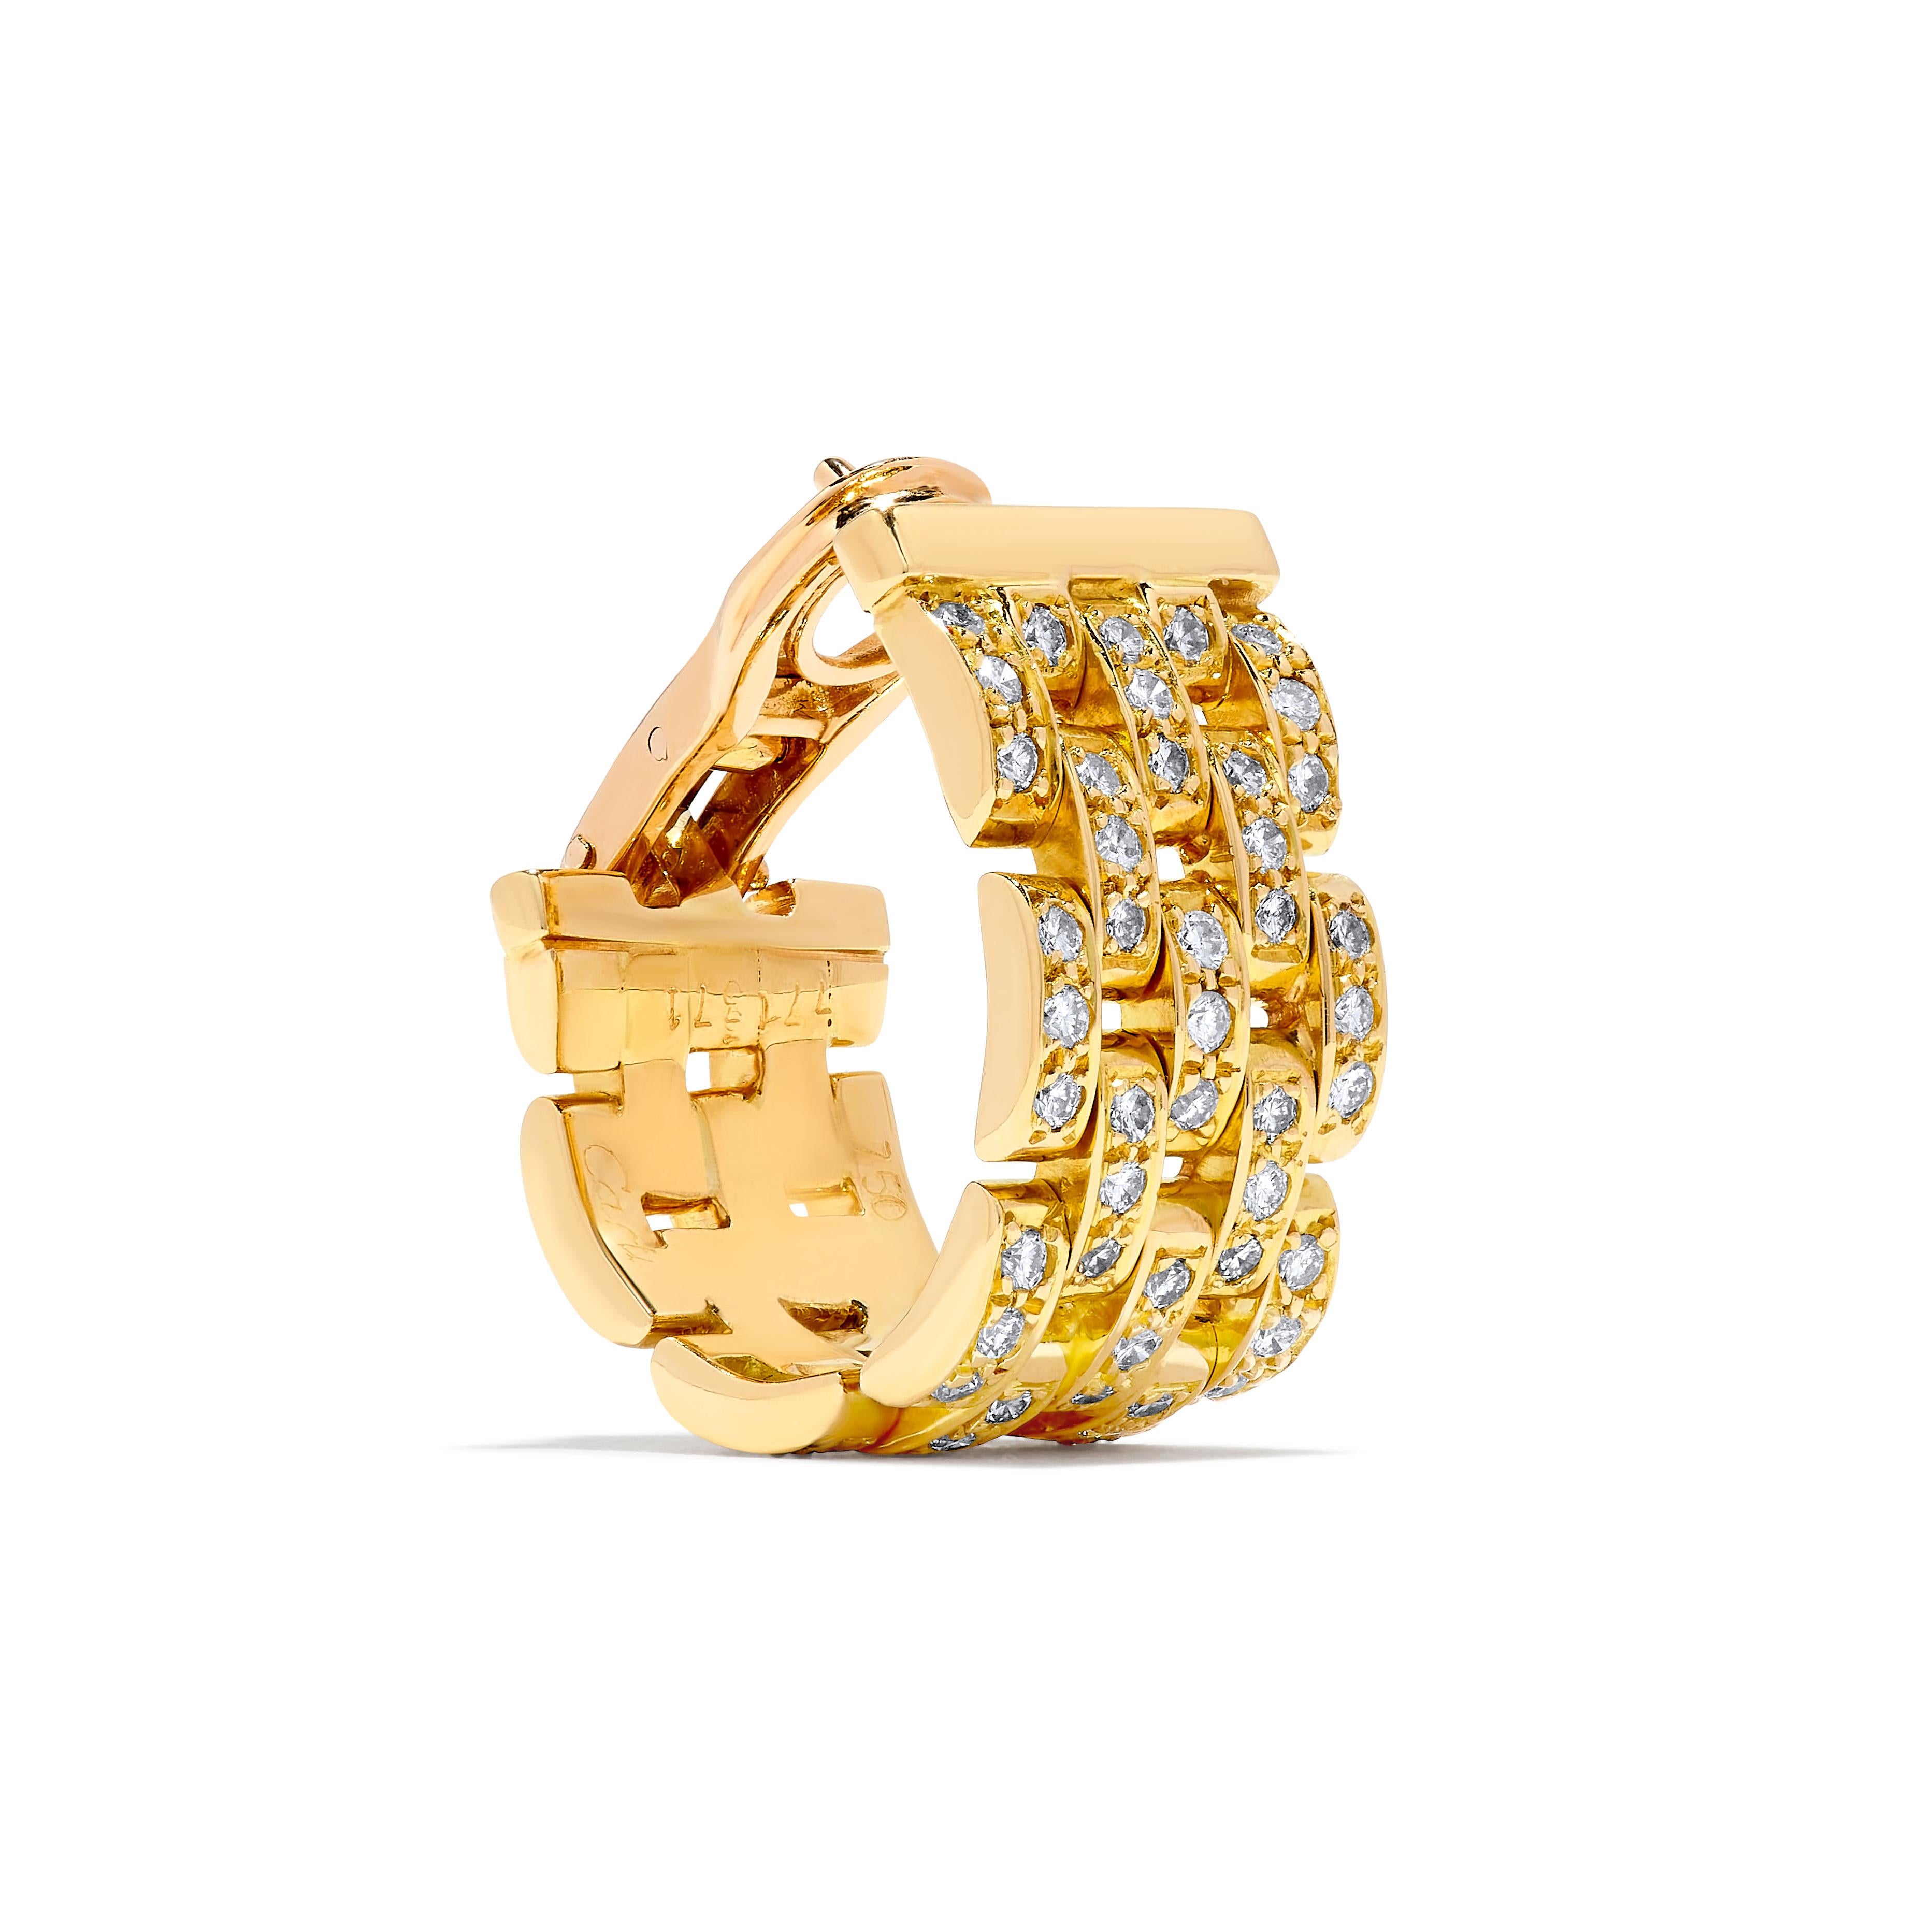 A diamond and 18k yellow gold 